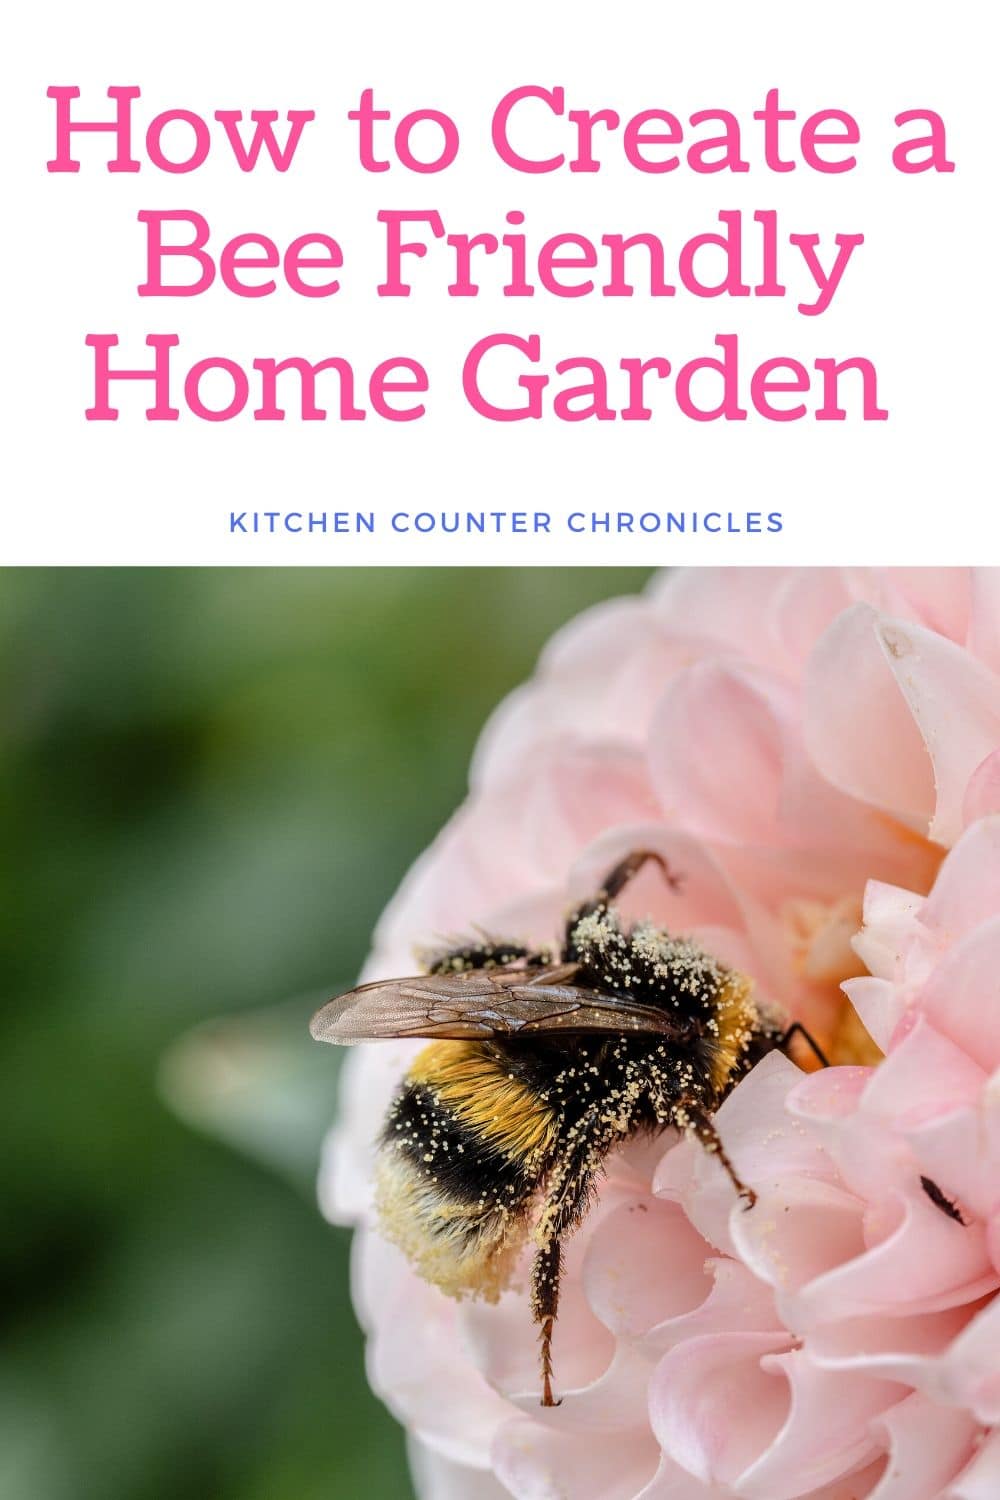 How To Create An Awesome Bee Garden At Home